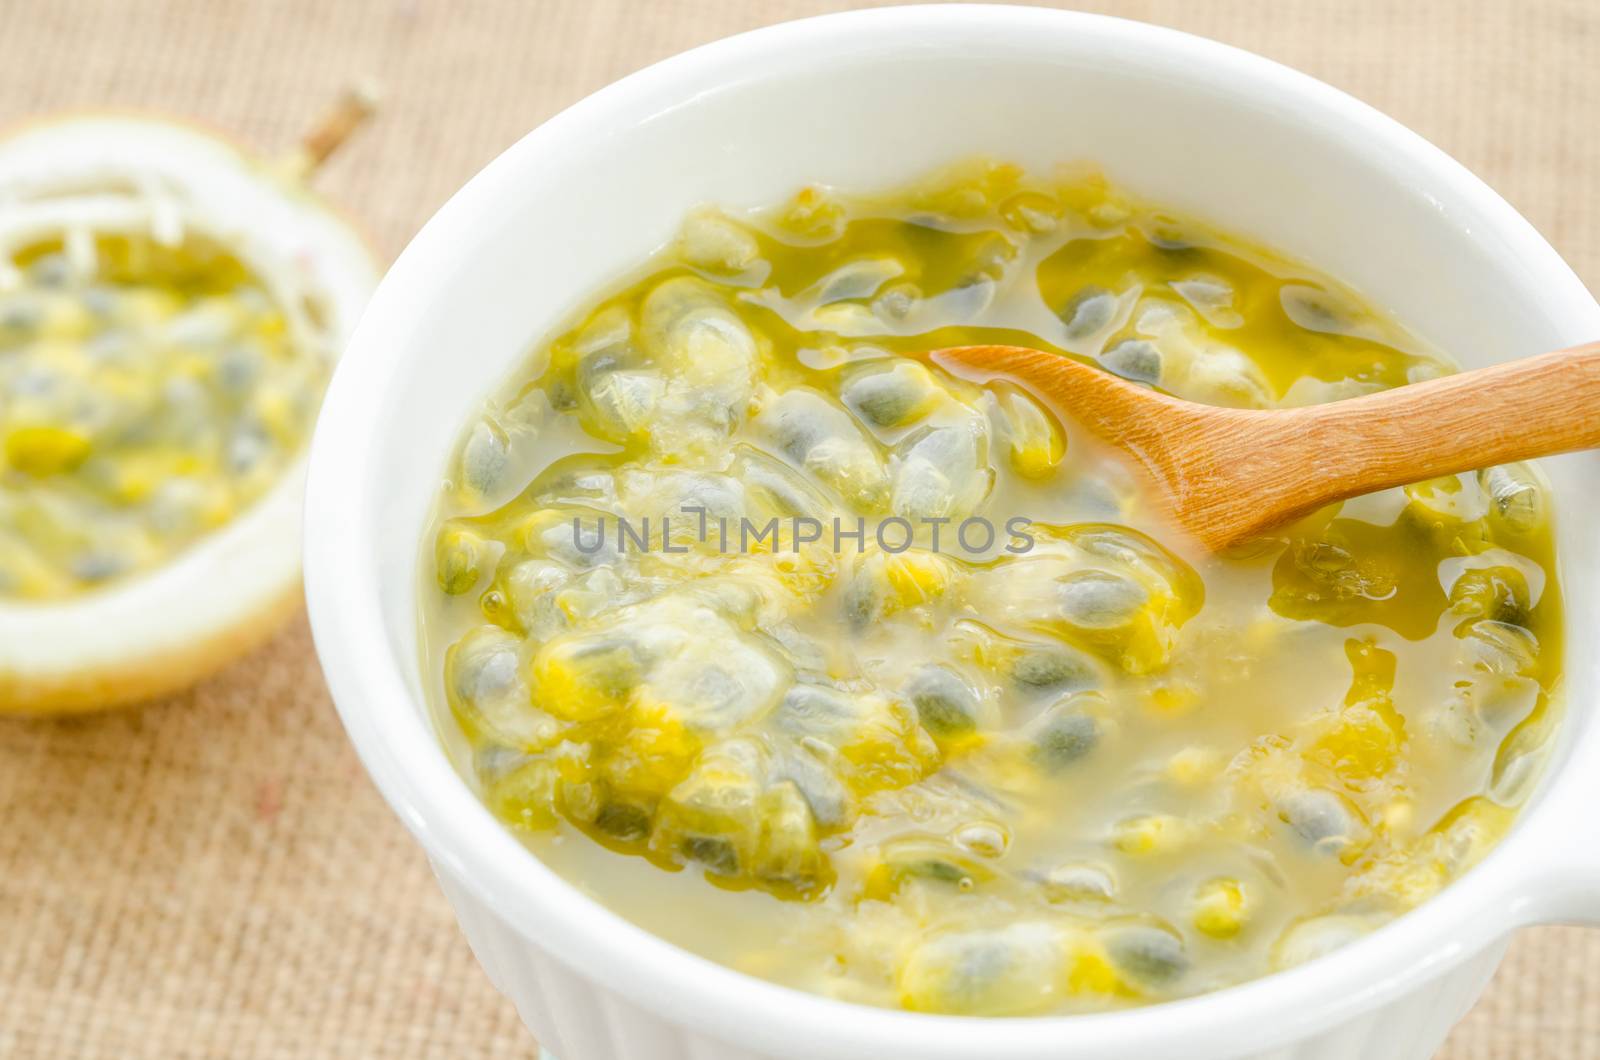 Passion fruit juice white bowl with wooden spoon on sack background.